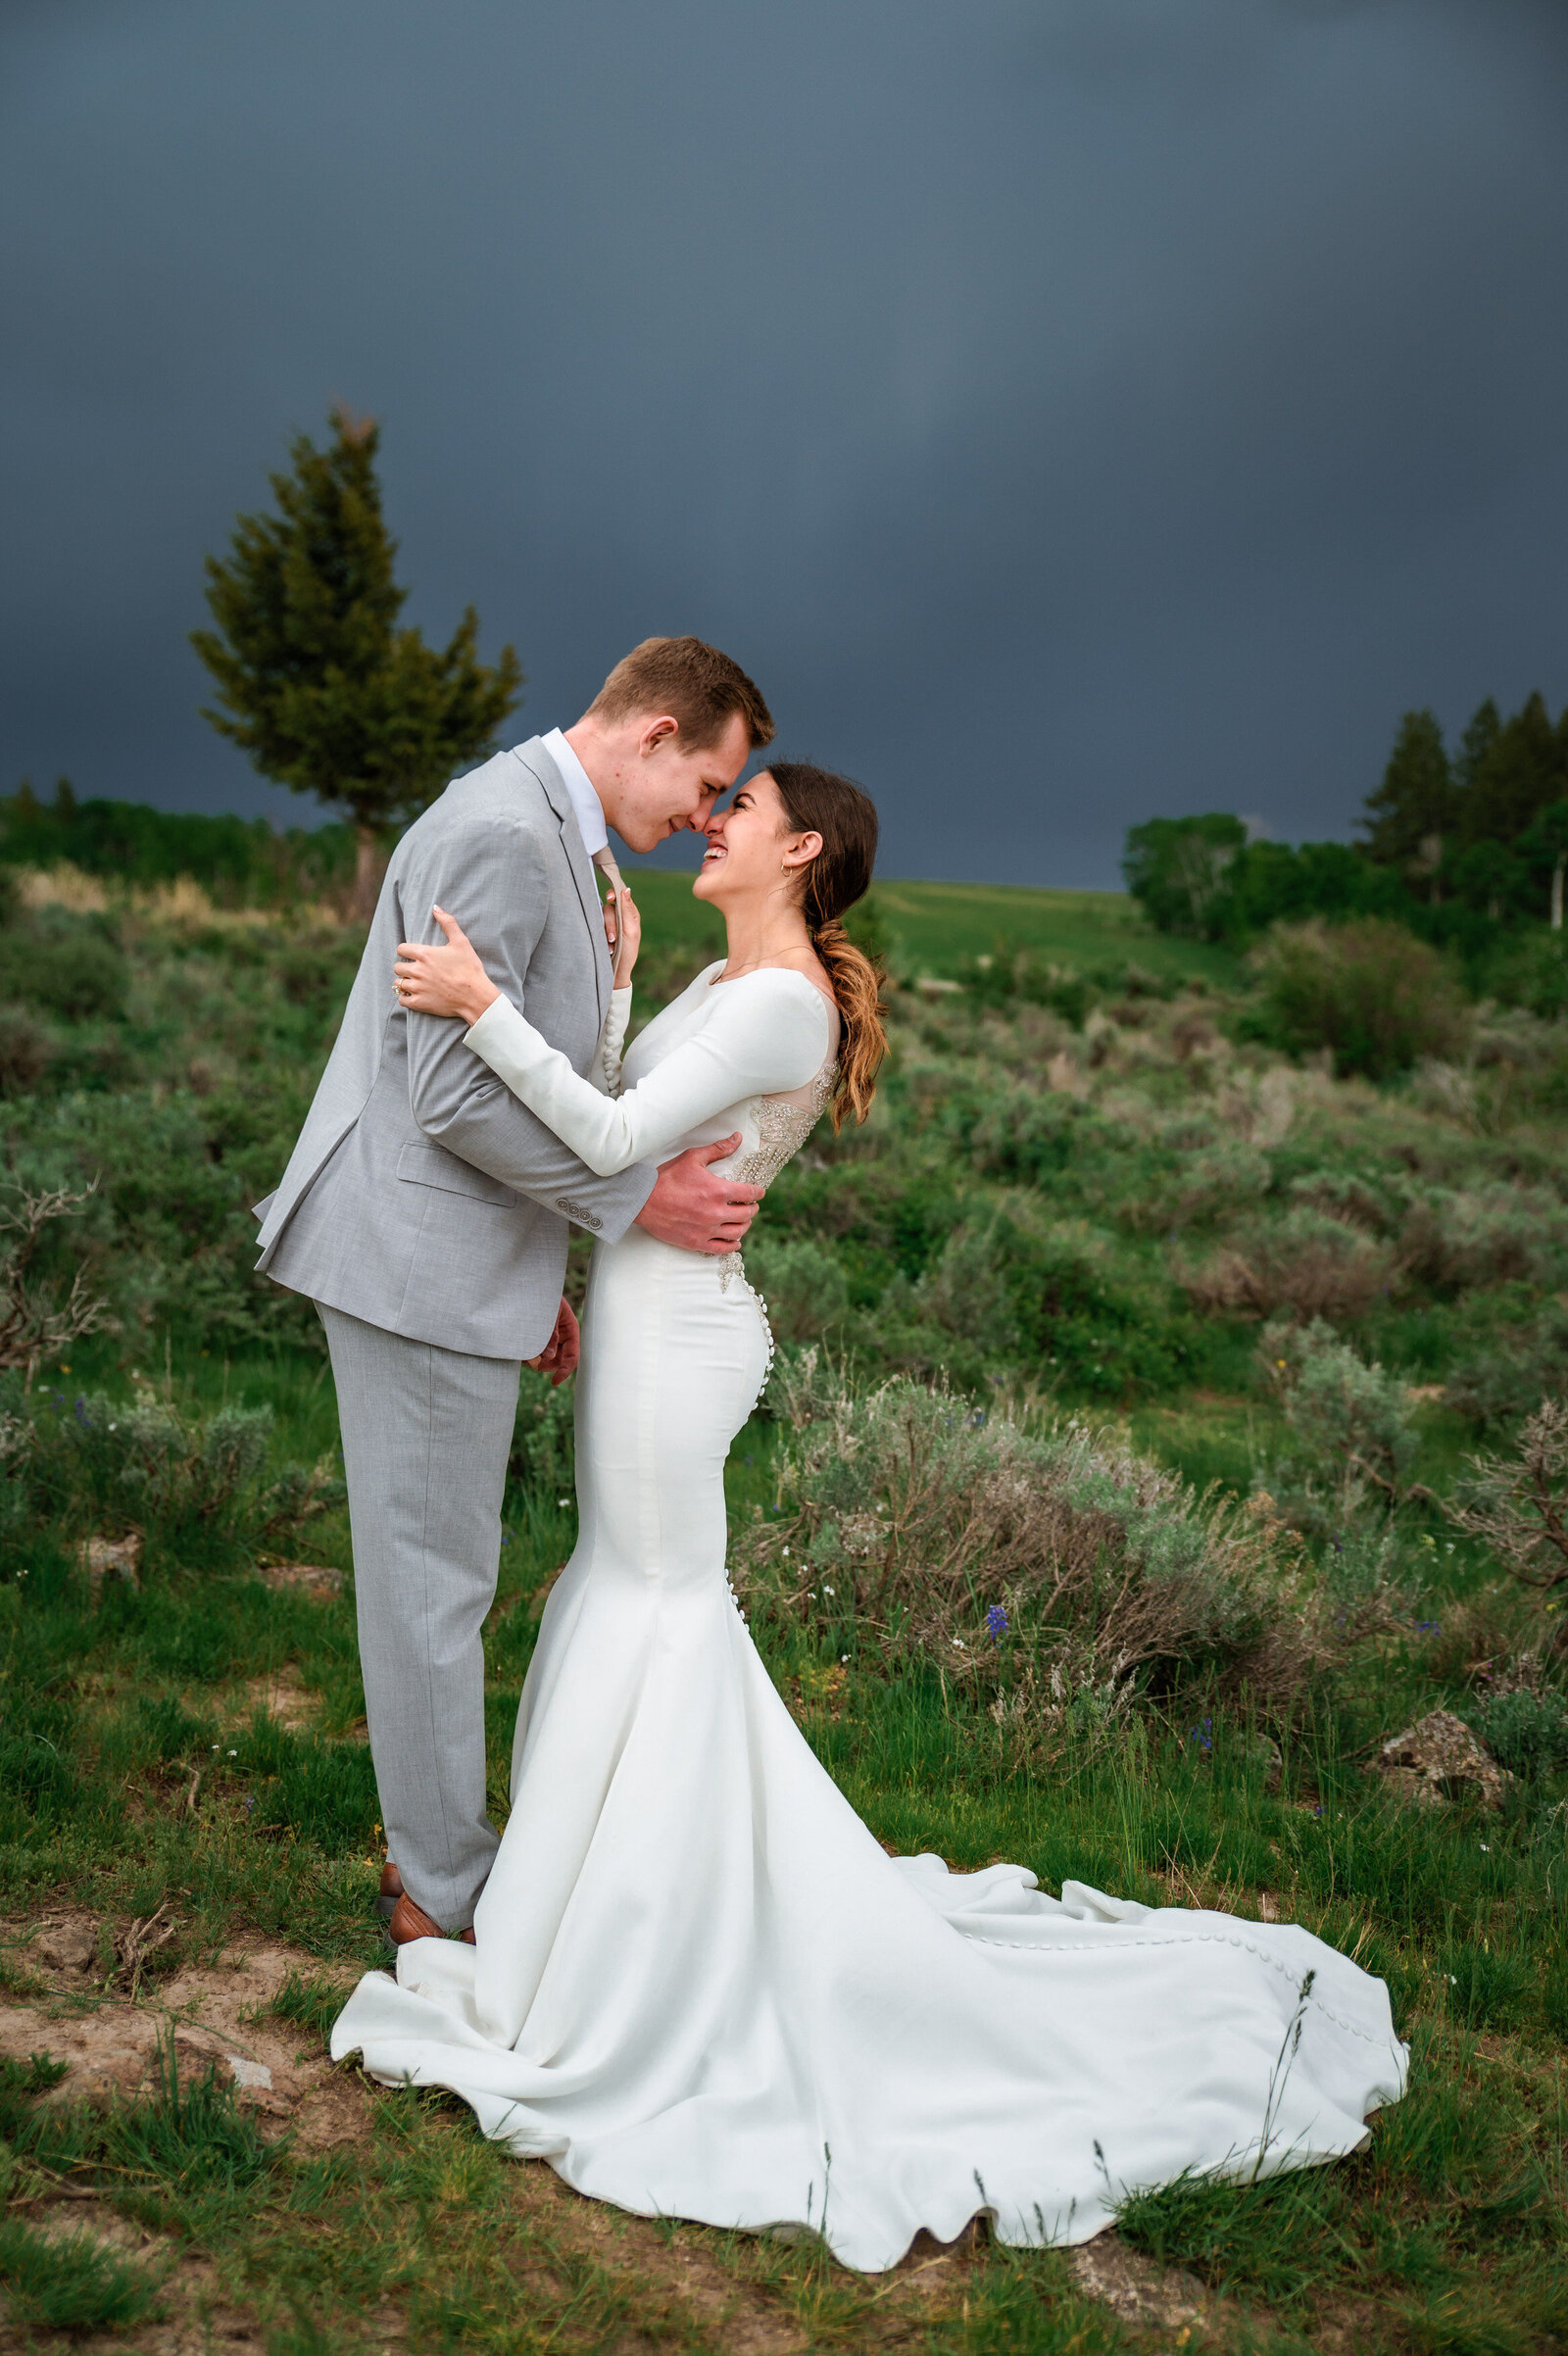 Jackson Hole photographers capture couple hugging and kissing during golden hour portraits